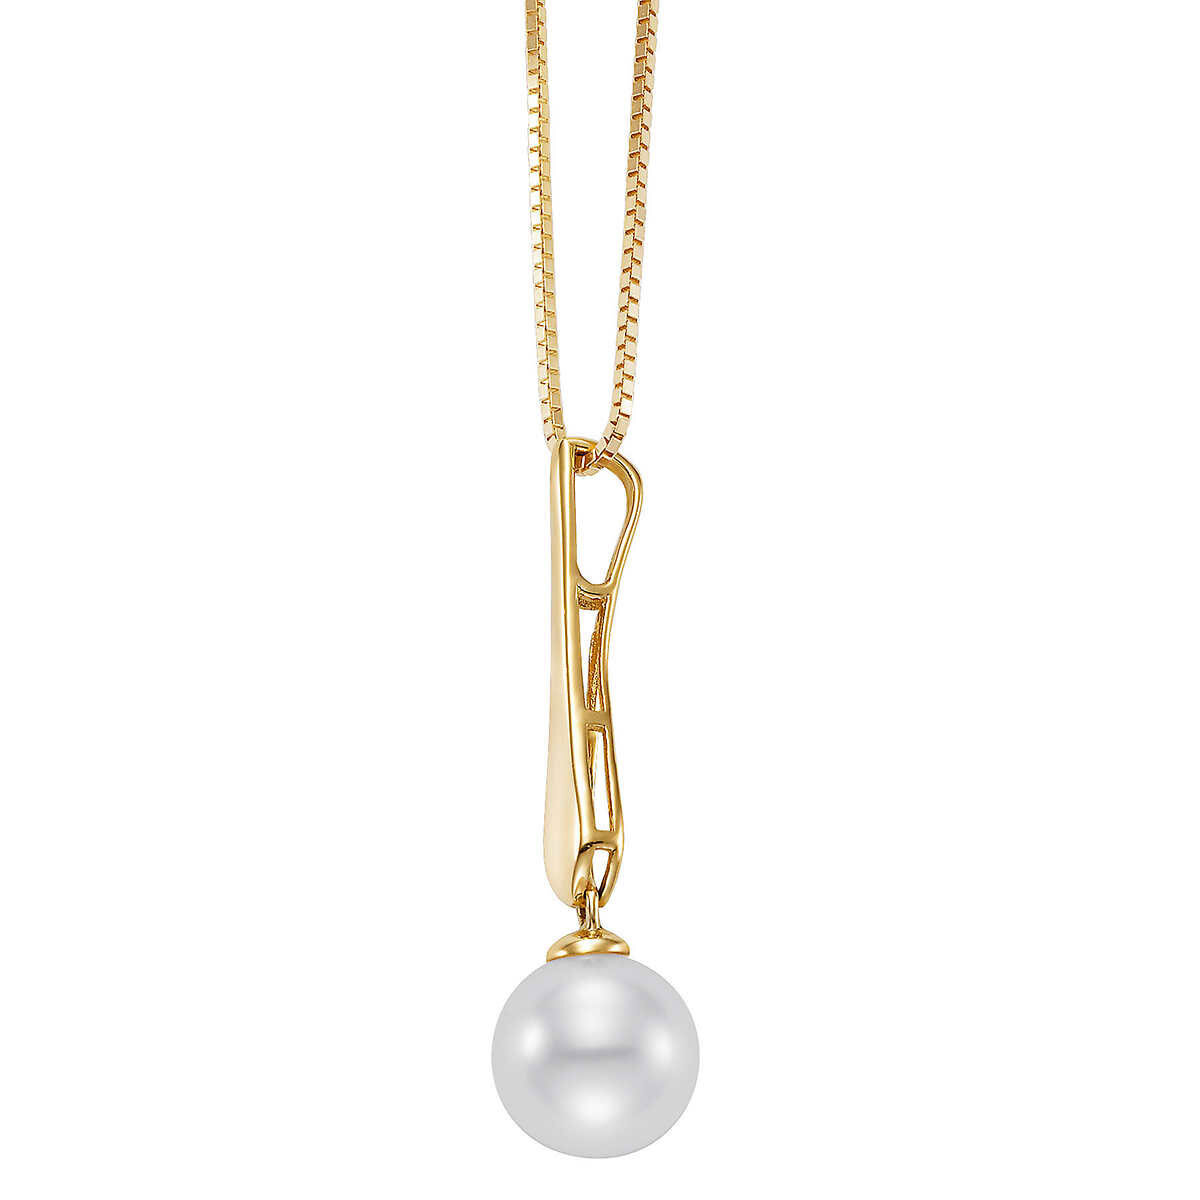 8-8.5mm Cultured Freshwater White Pearl Drop Pendant, 14ct Yellow Gold